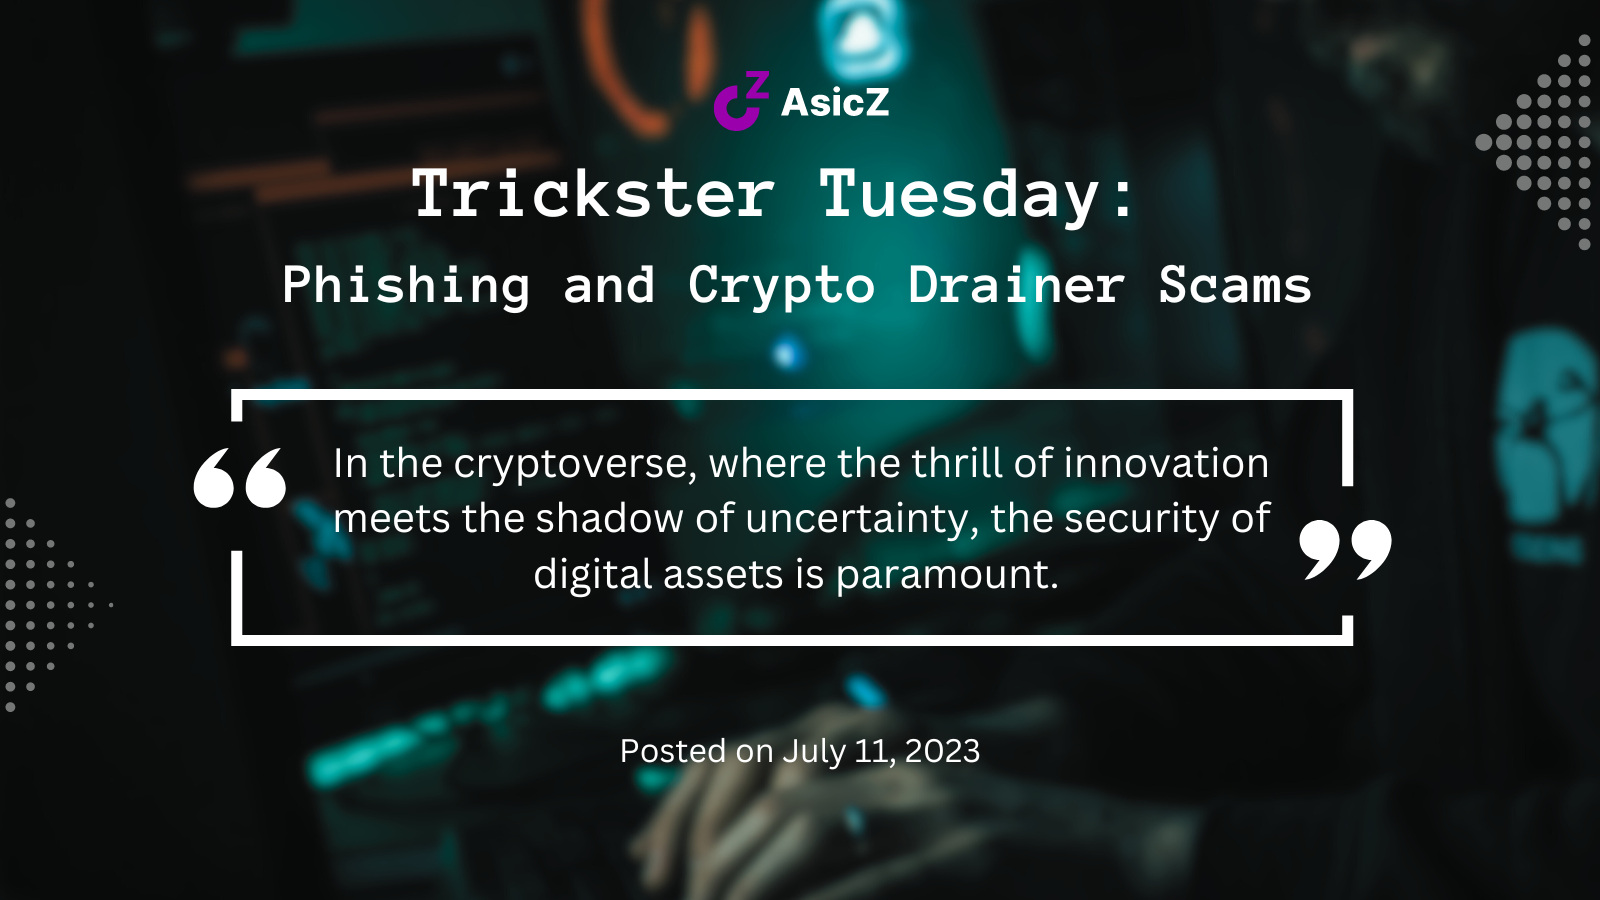 Trickster Tuesday: Phishing and Crypto Drainer Scams